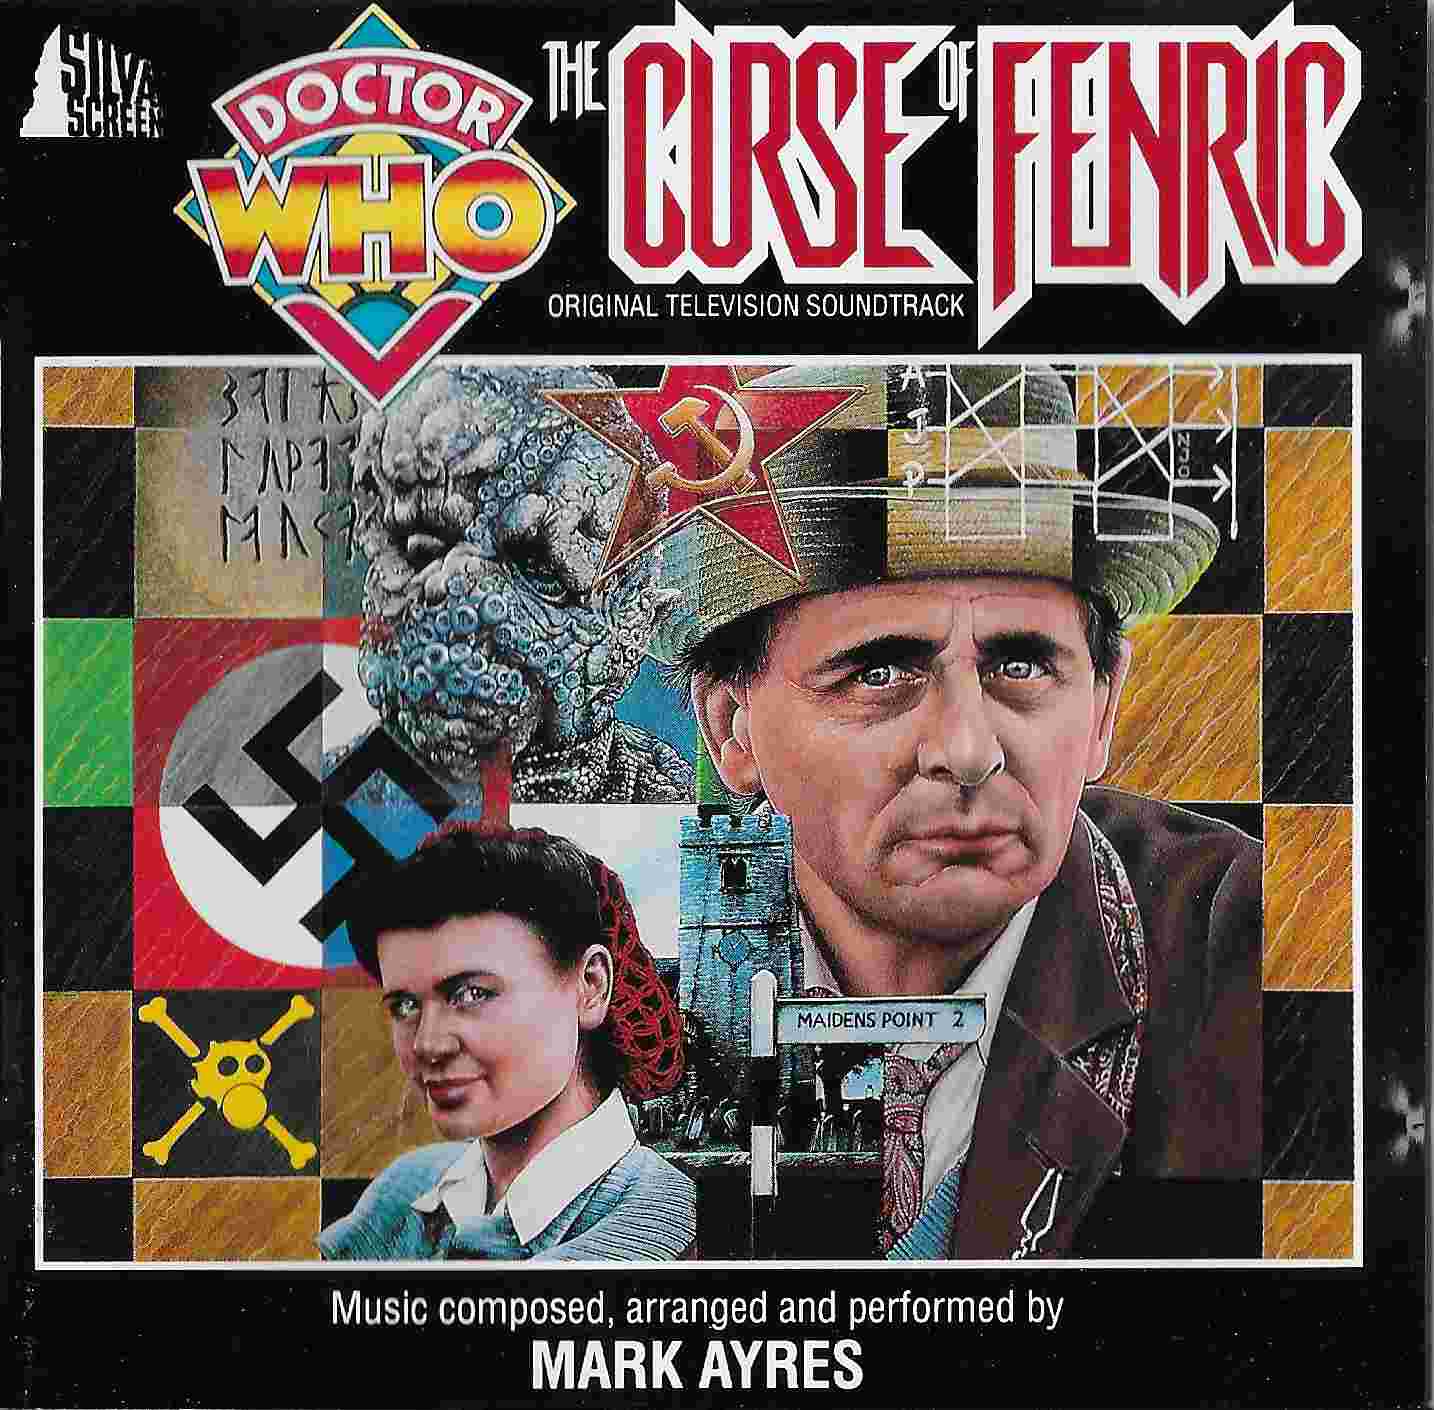 Picture of FILMCD 087 Doctor who - The curse of Fenric by artist Mark Ayres from the BBC cds - Records and Tapes library